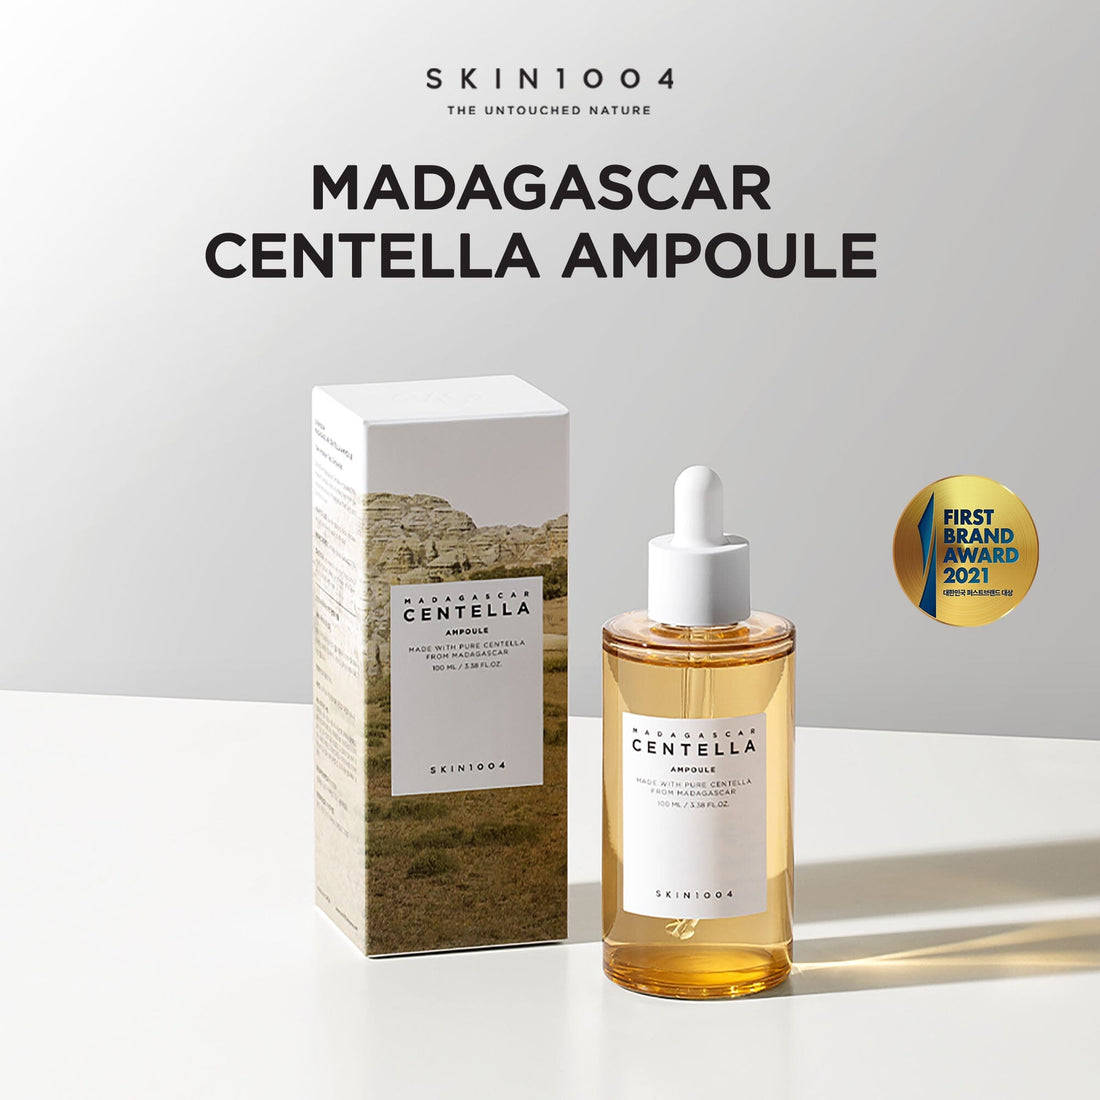 SKIN1004 Madagascar Centella Ampoule 30ml, at Orion Beauty. SKIN1004 Official Sole Authorized Retailer in Sri Lanka!